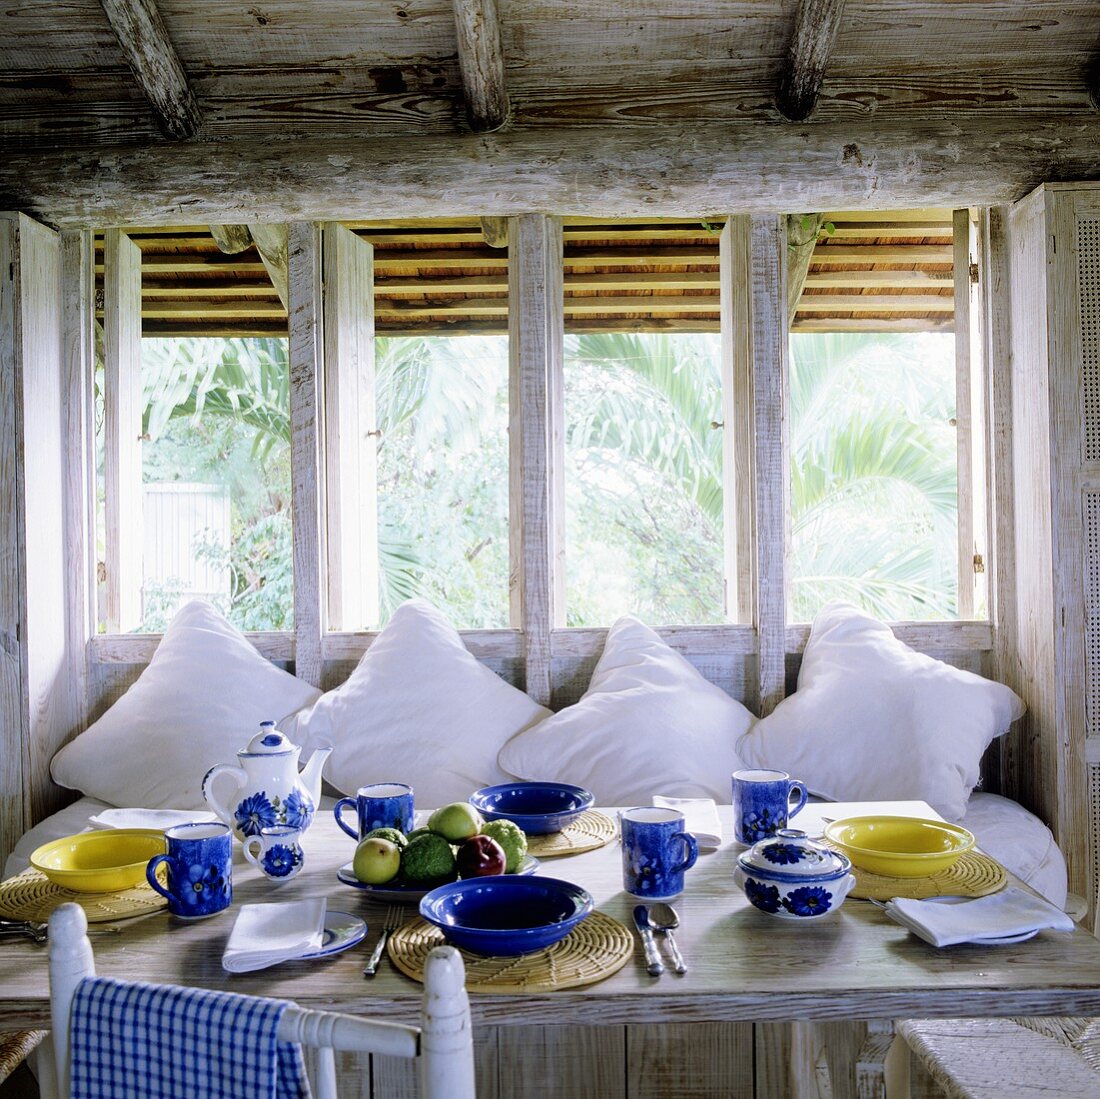 Breakfast in a rustic country house kitchen with white cushions on a comfortable bench